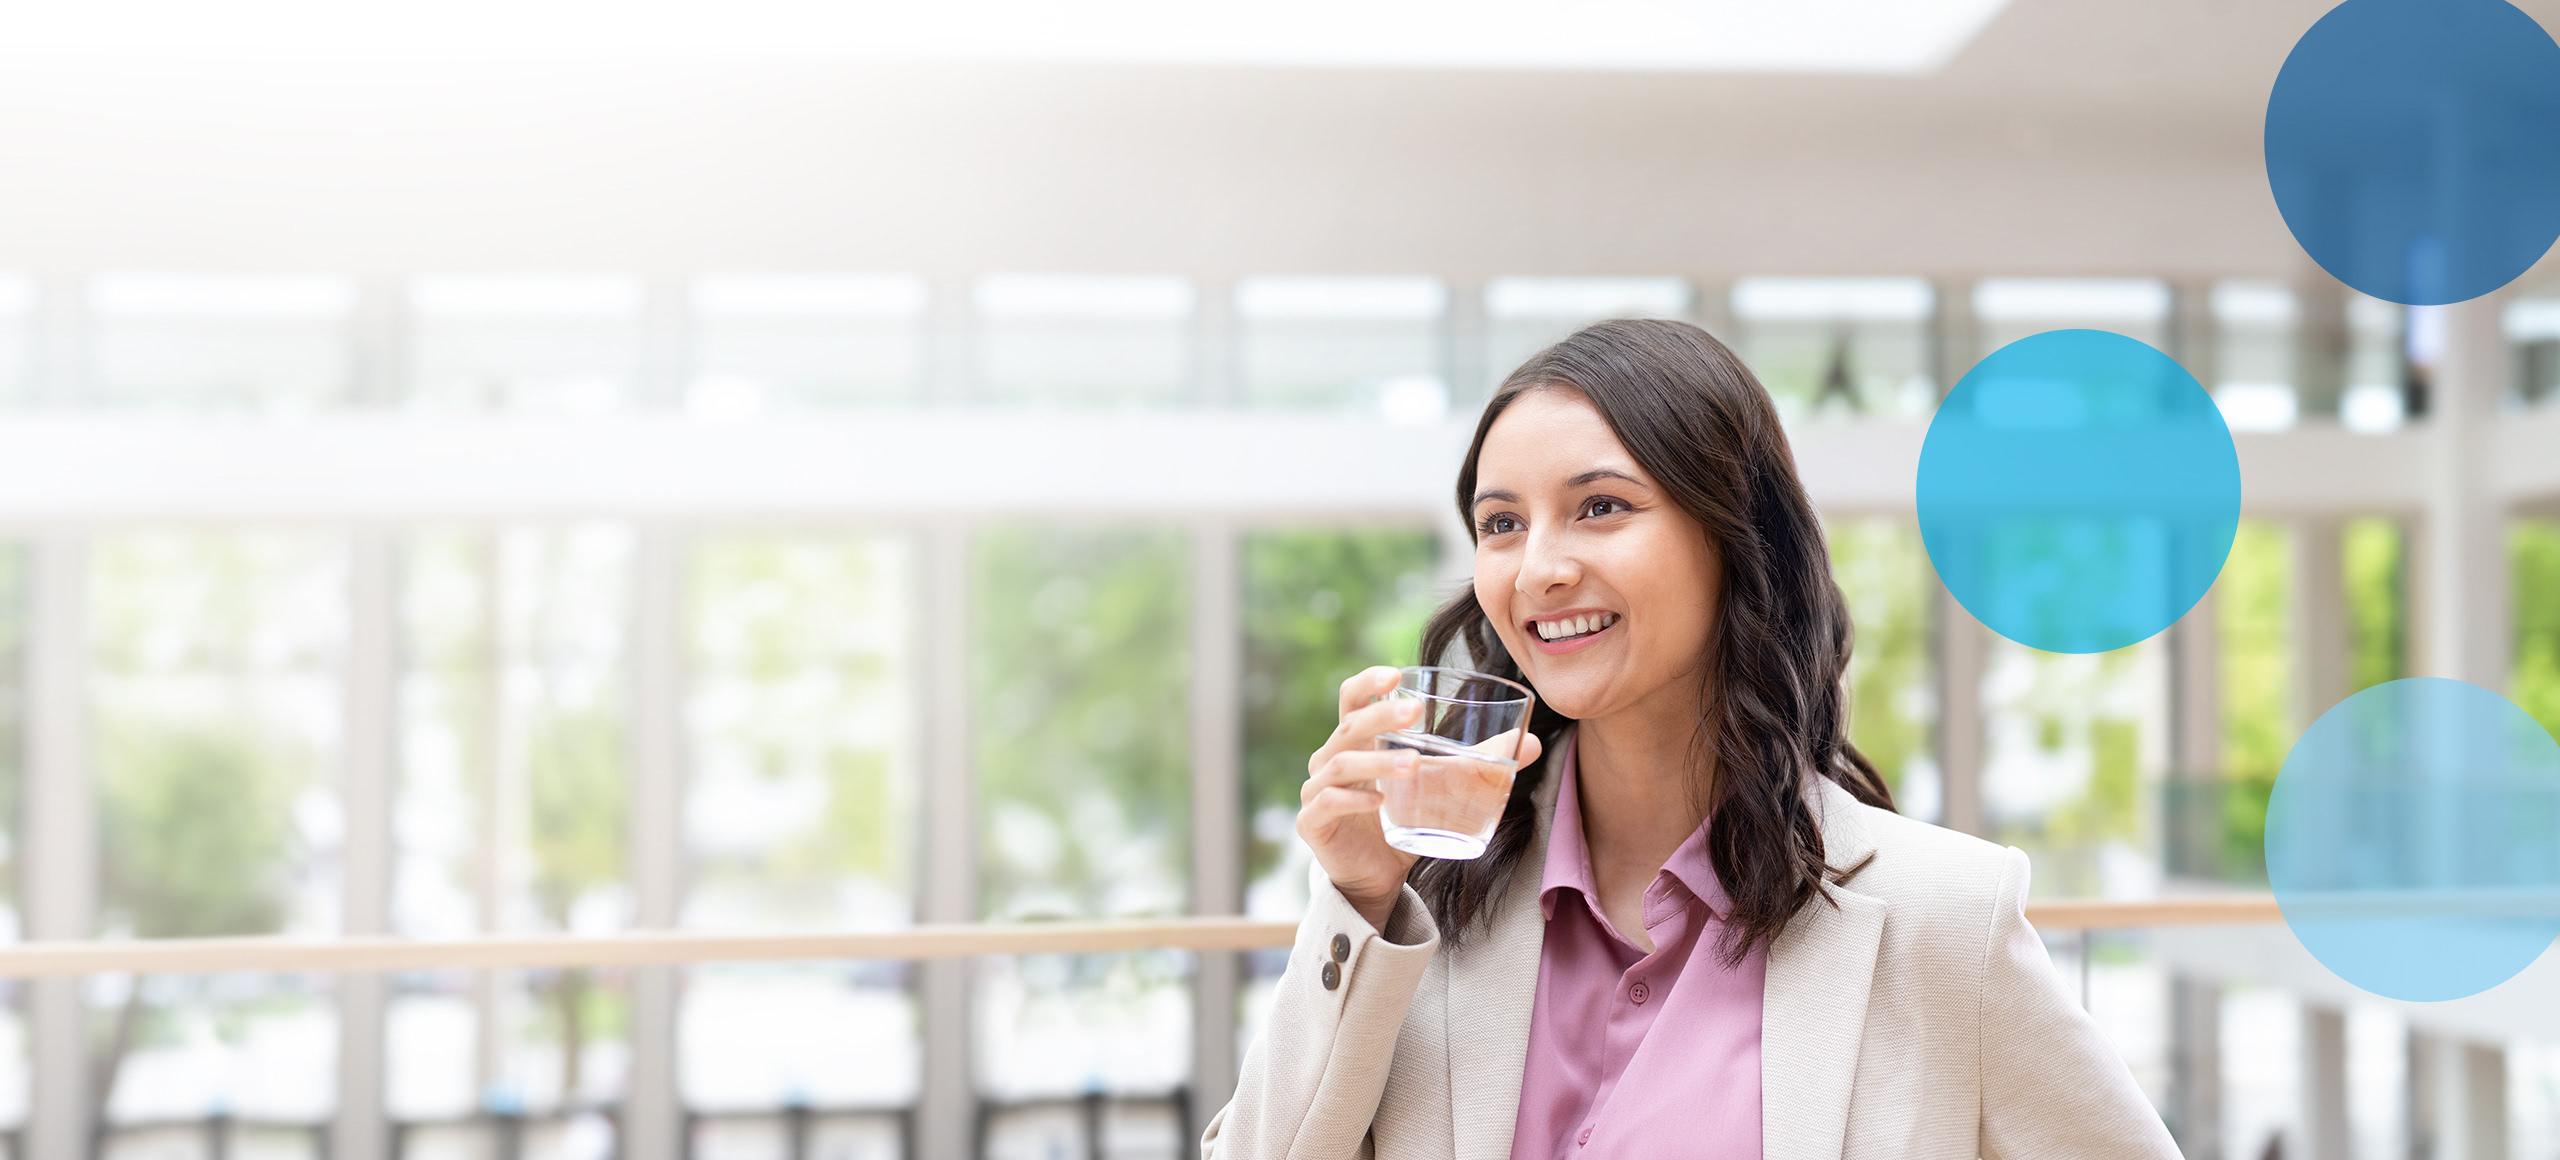 Woman in business suit holding water glass